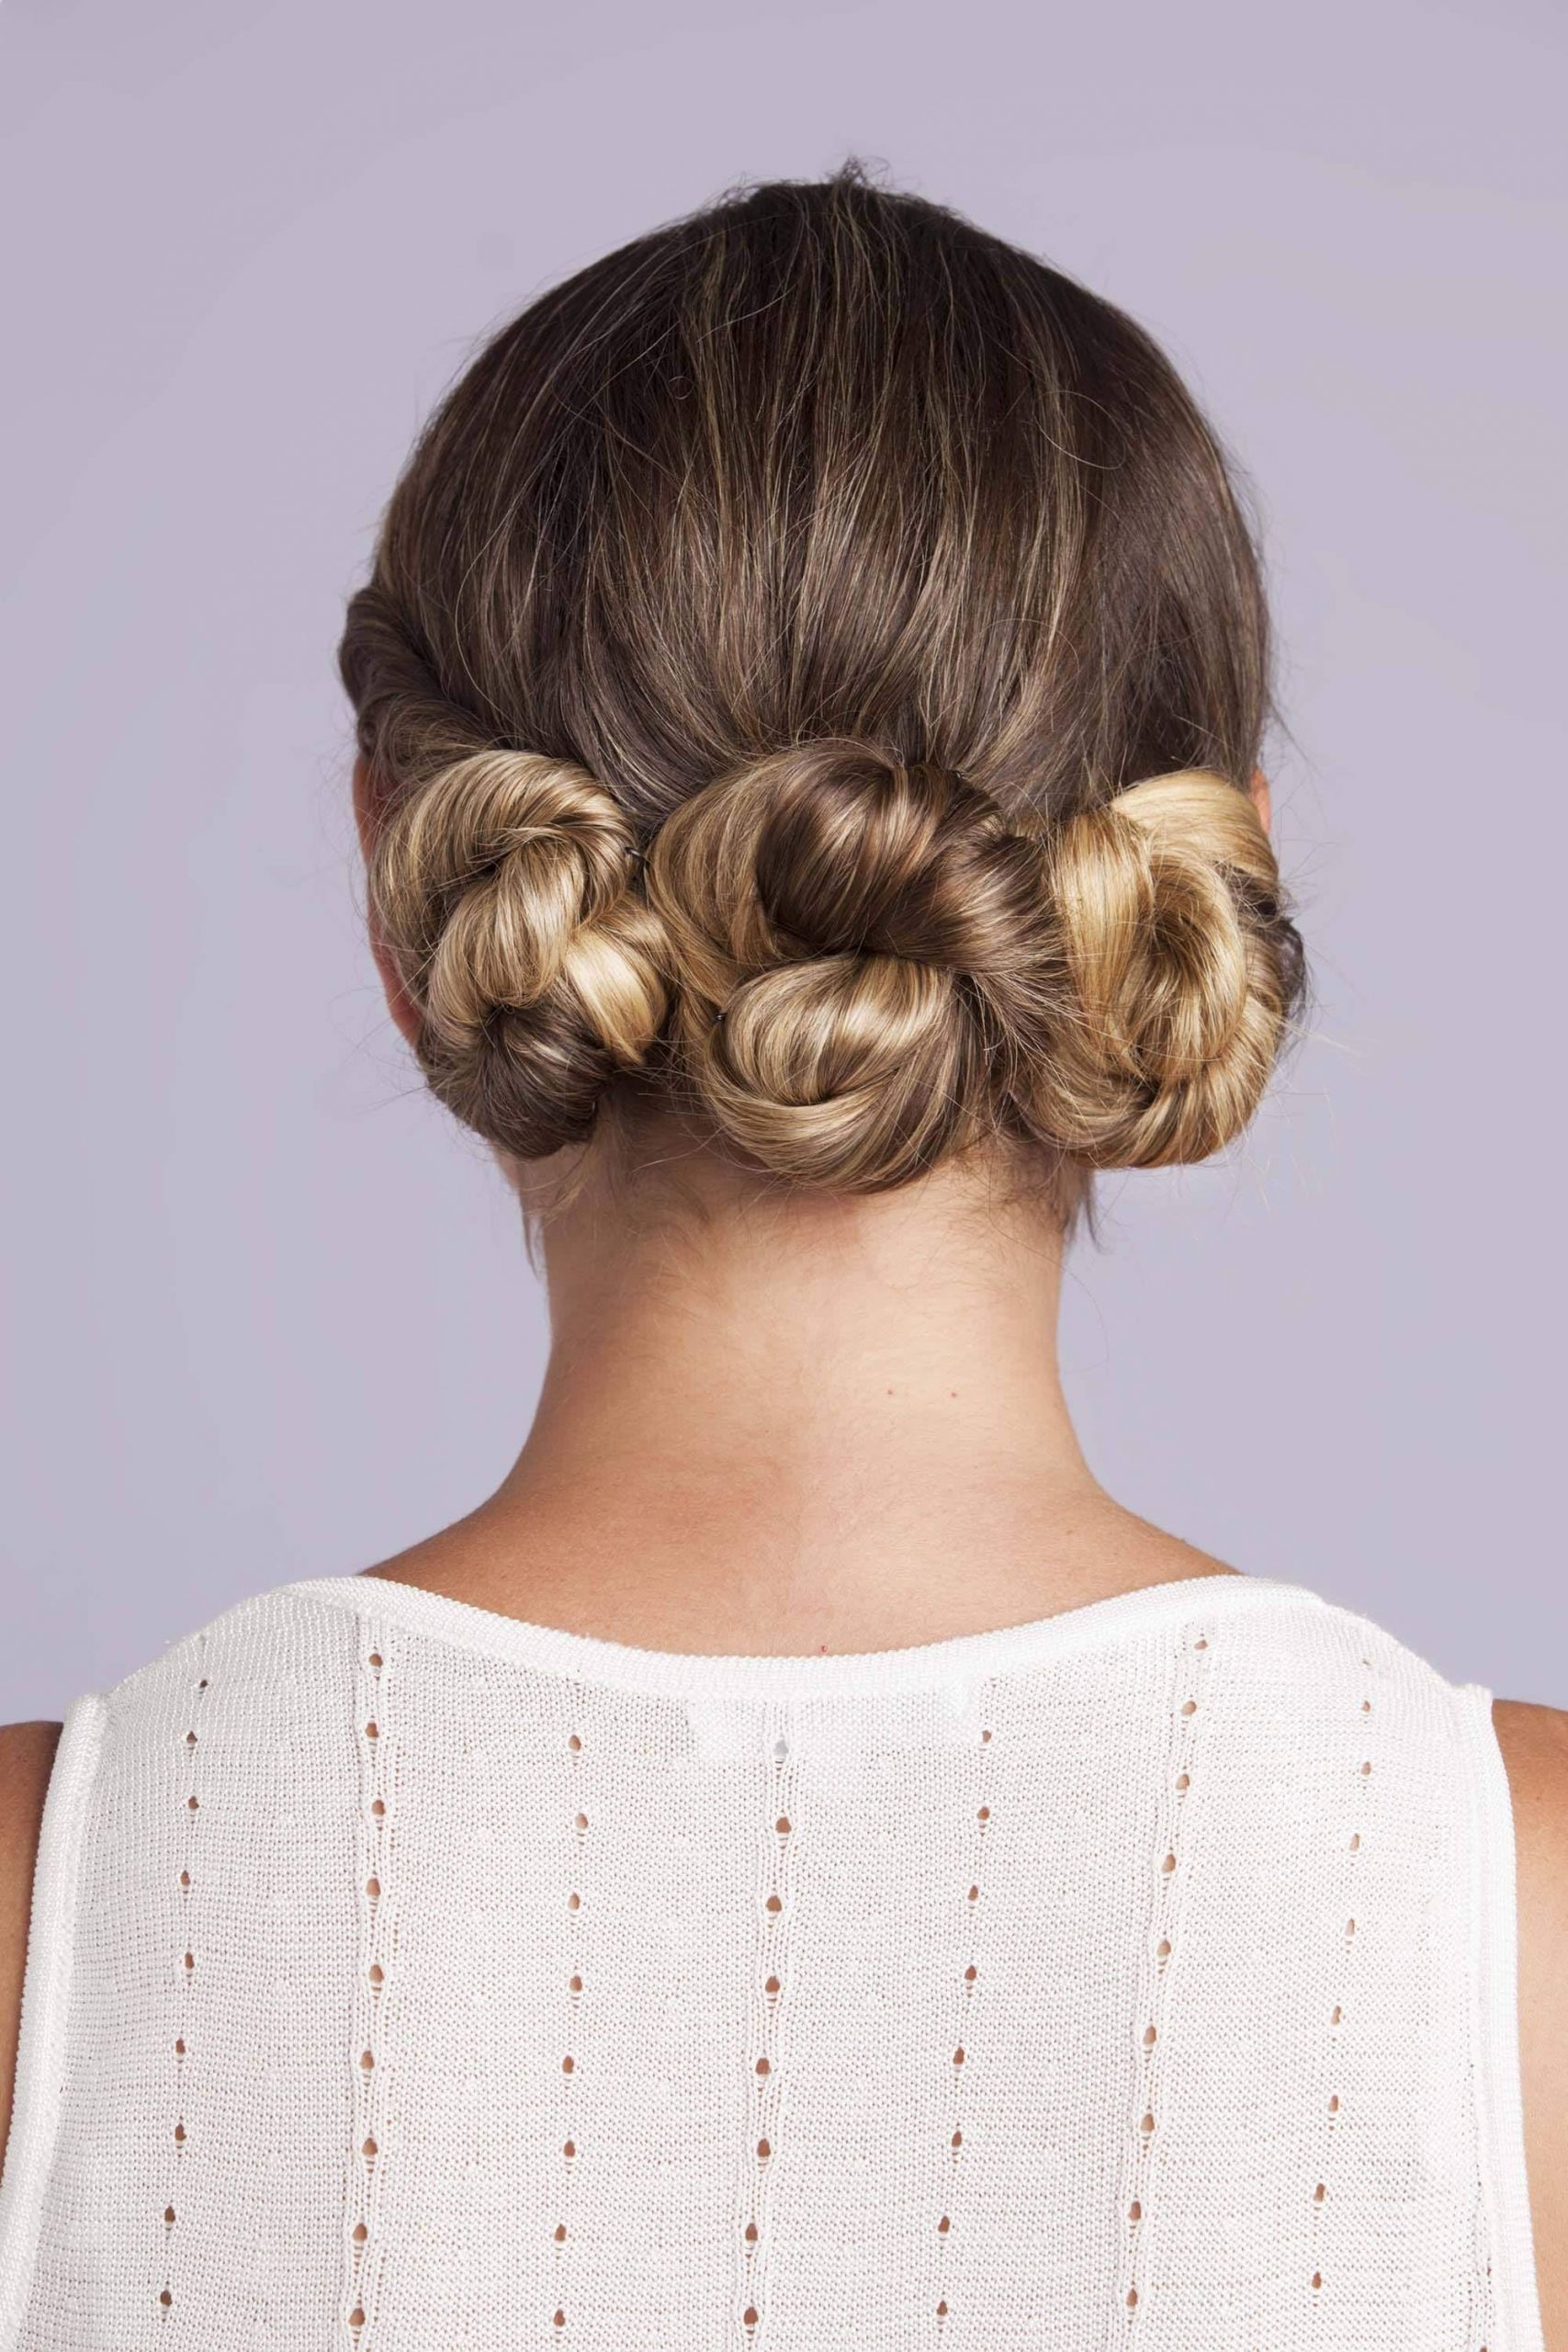 Wedding Hairstyle Buns
 14 Chic Wedding Hairstyles for Short Hair